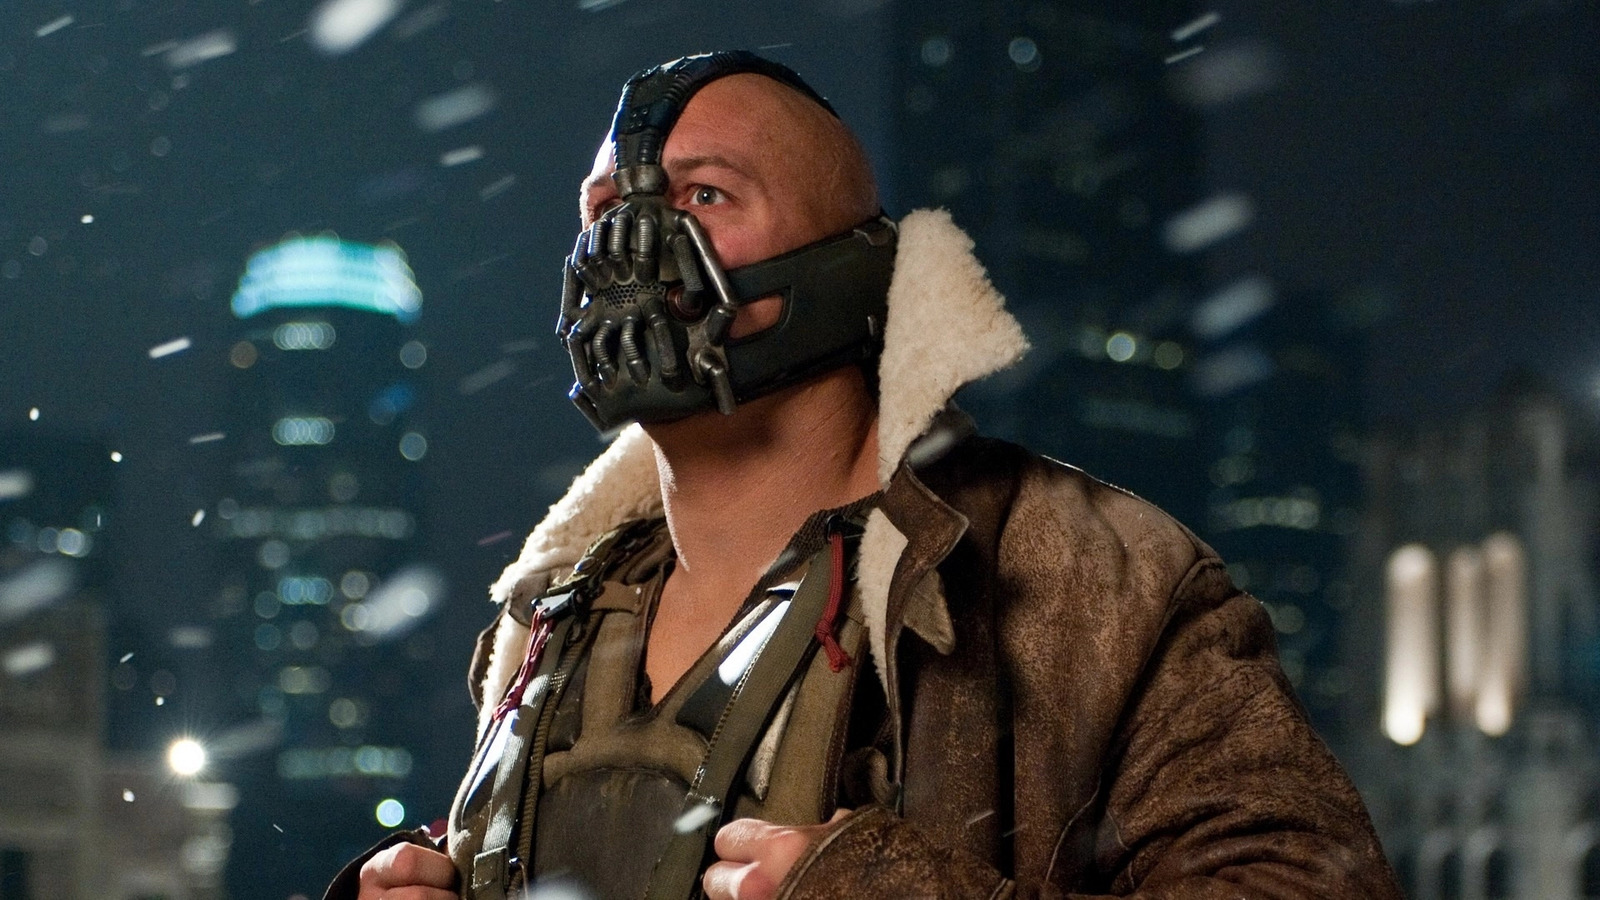 Tom Hardy Based Bane’s Voice In The Dark Knight Rises On A Real-Life Legend